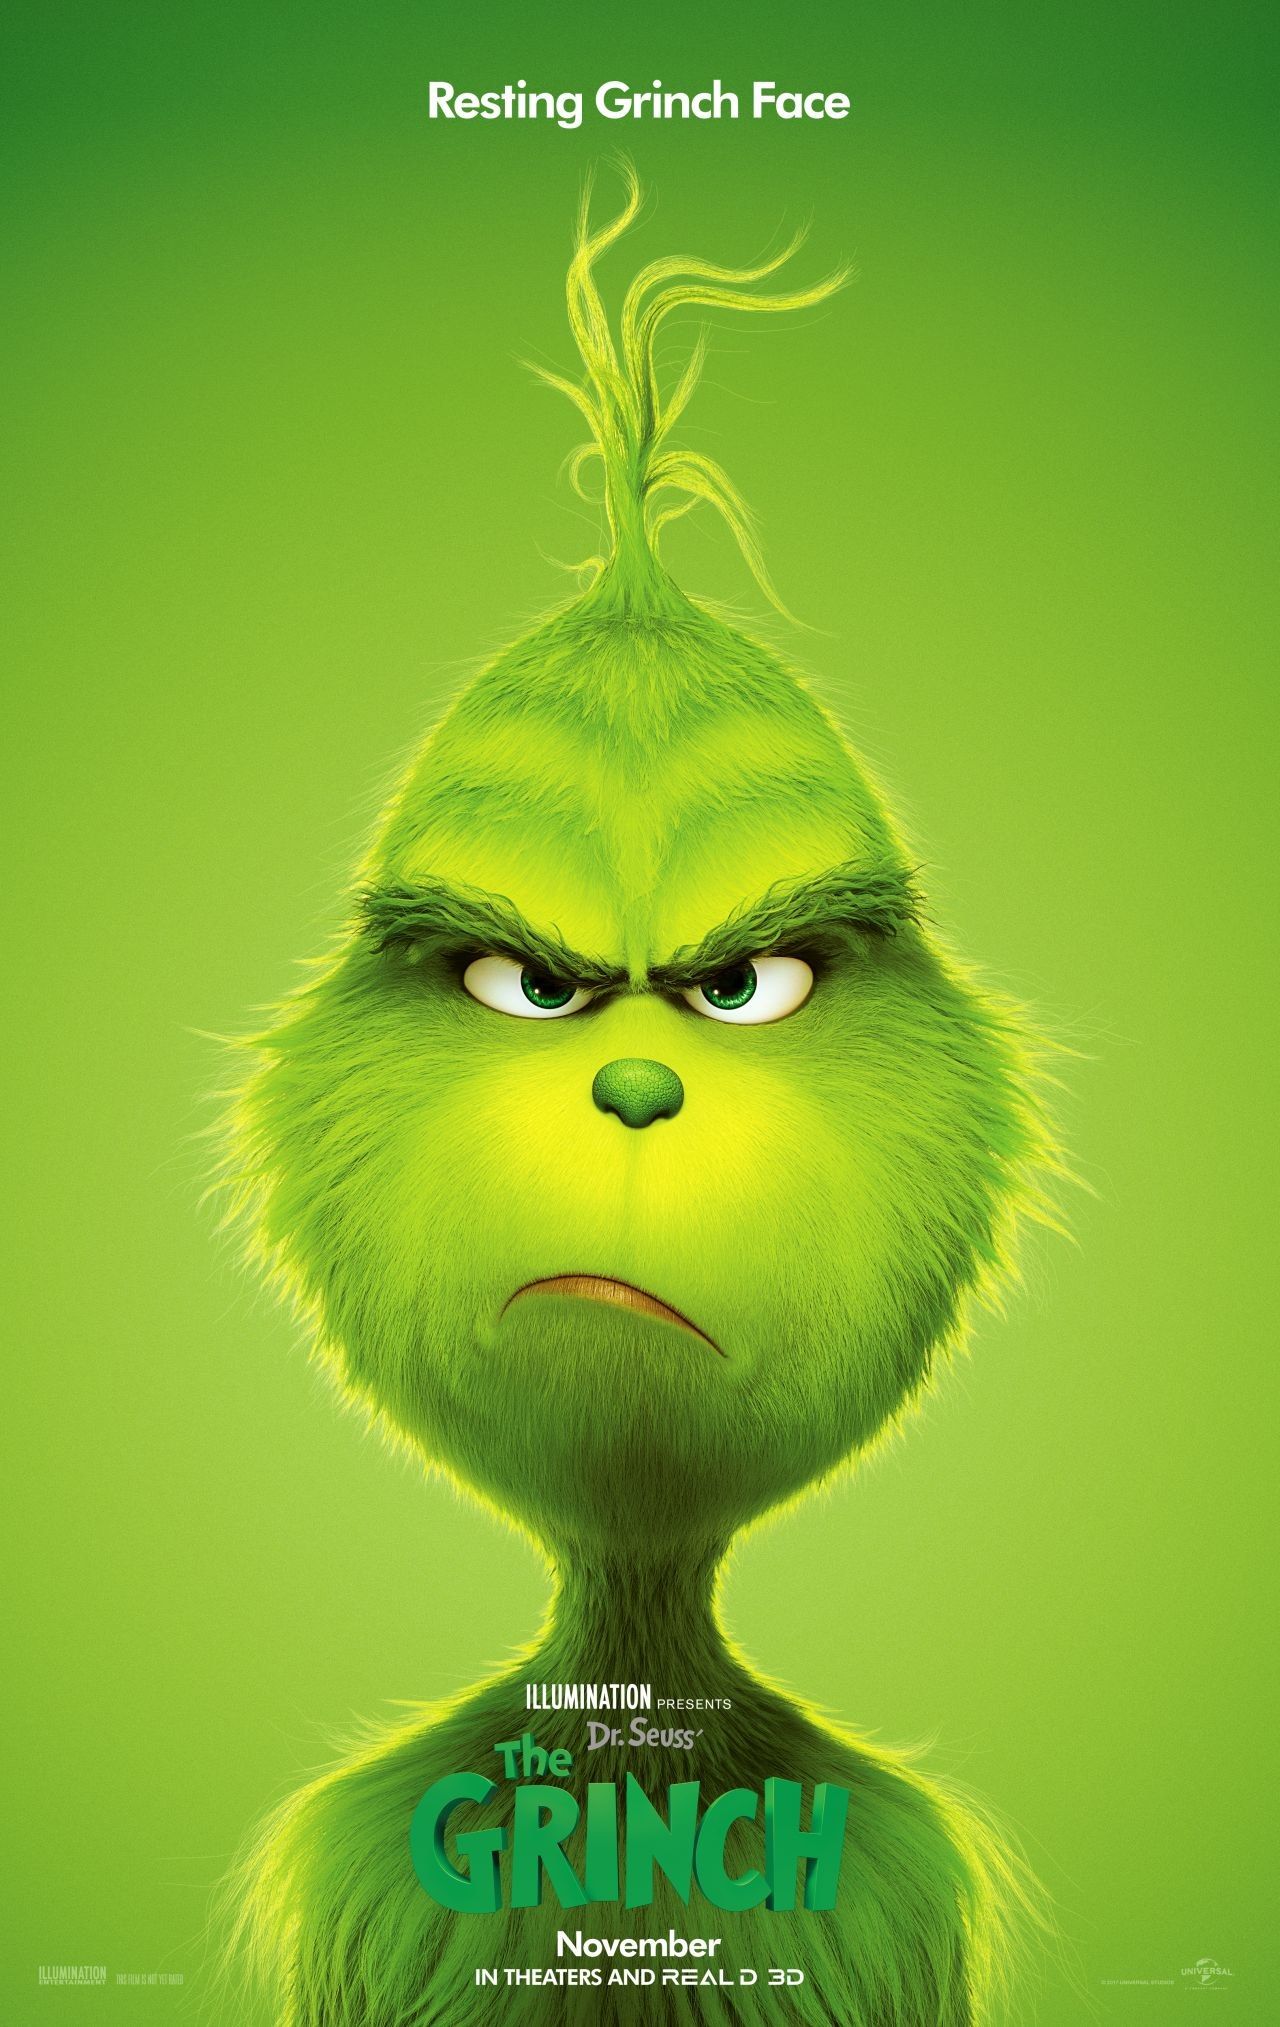 WATCH: Trailers, TV Spots, Posters and Image for 'The Grinch'. Animation World Network